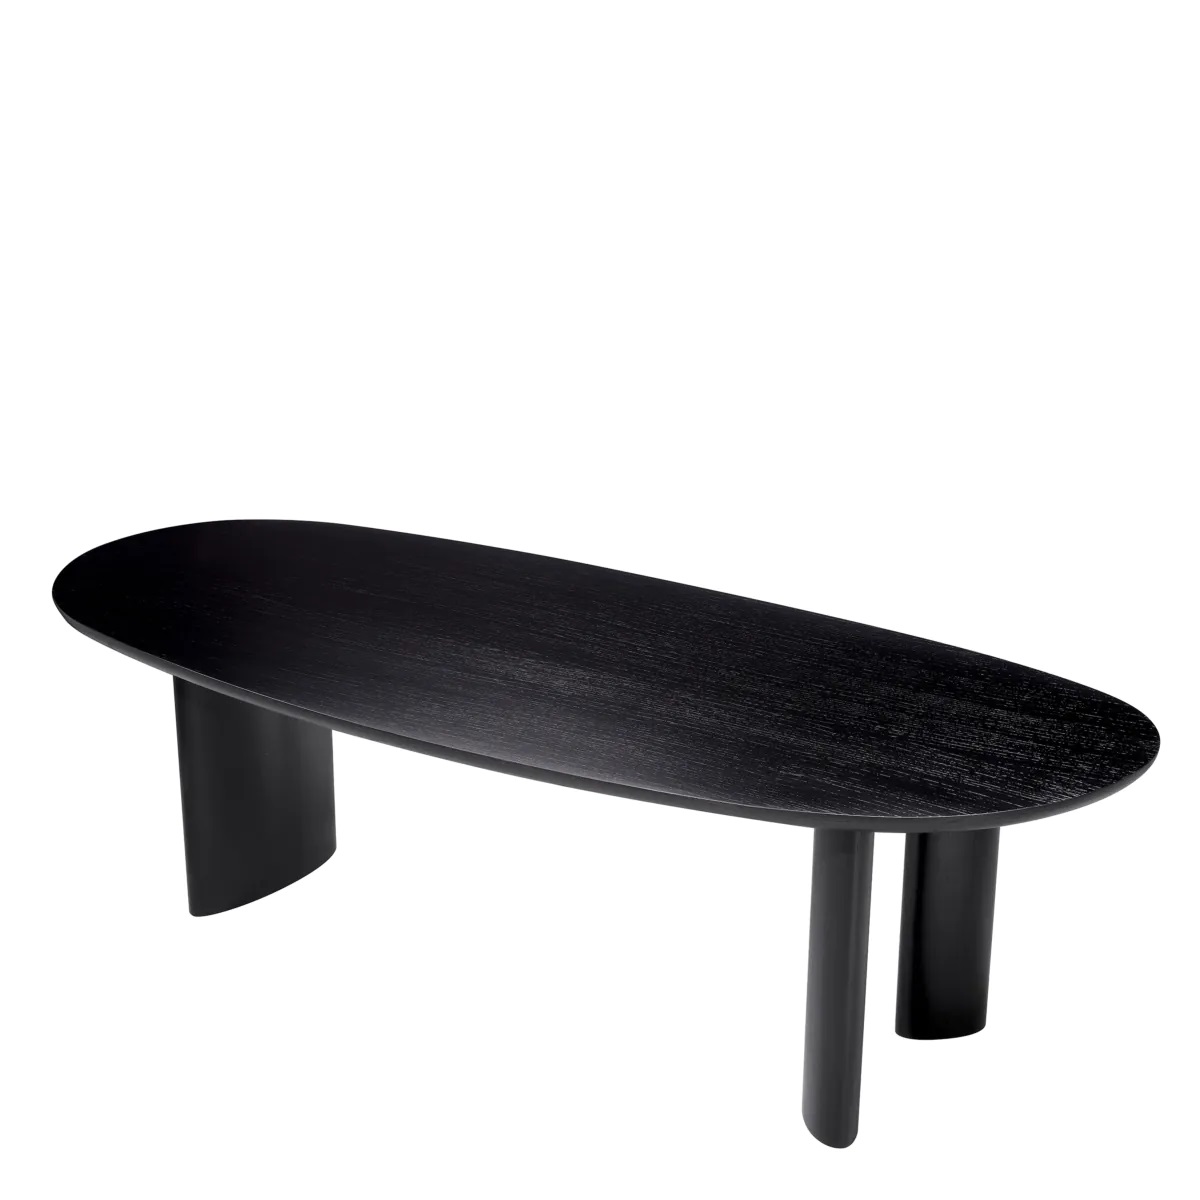 Linder table